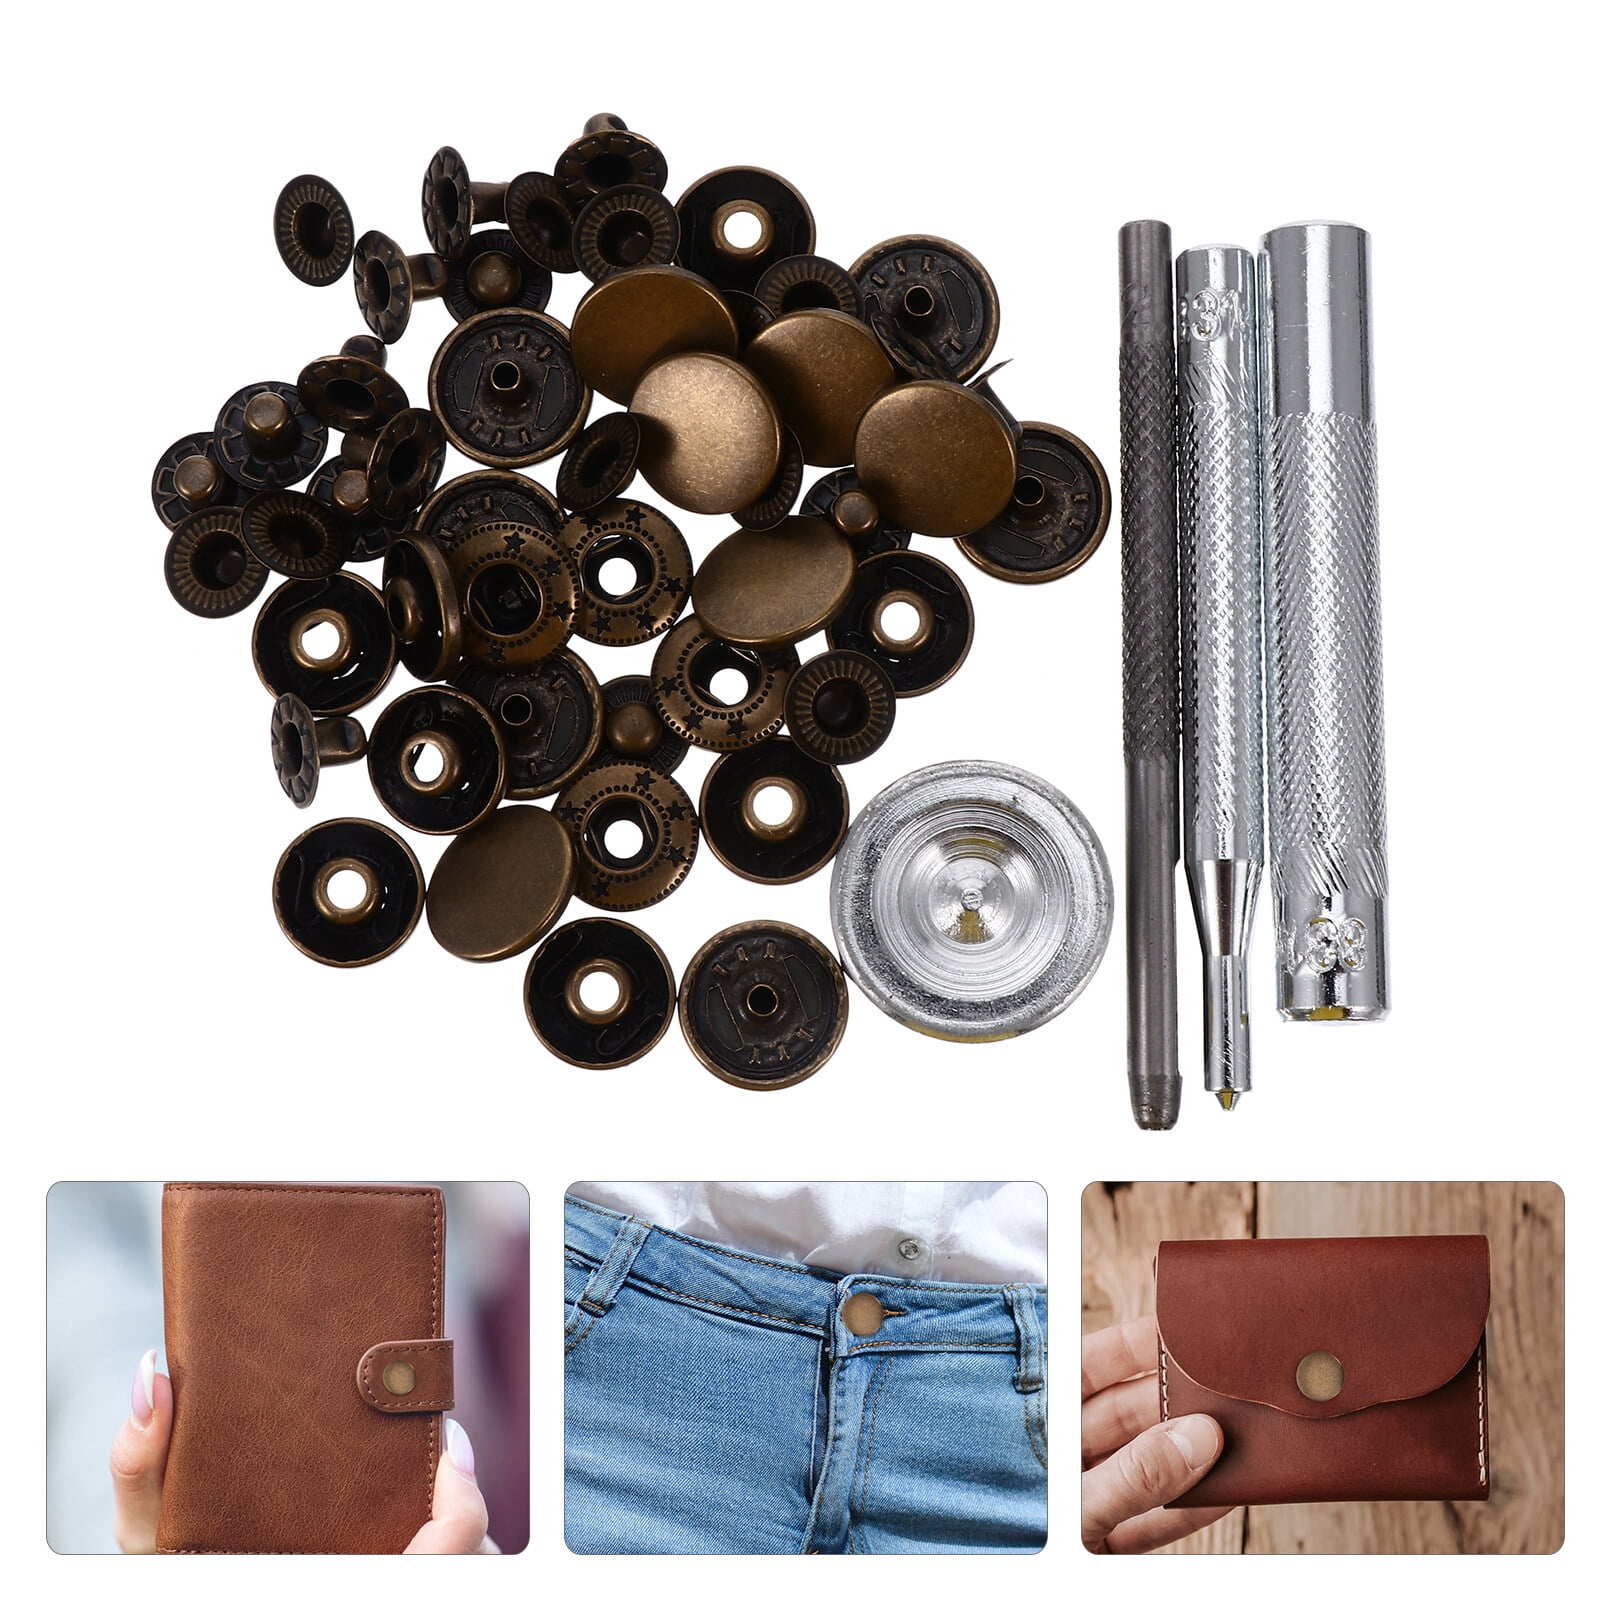 Best Snap-Fastener Kits for Garments and Artworks –